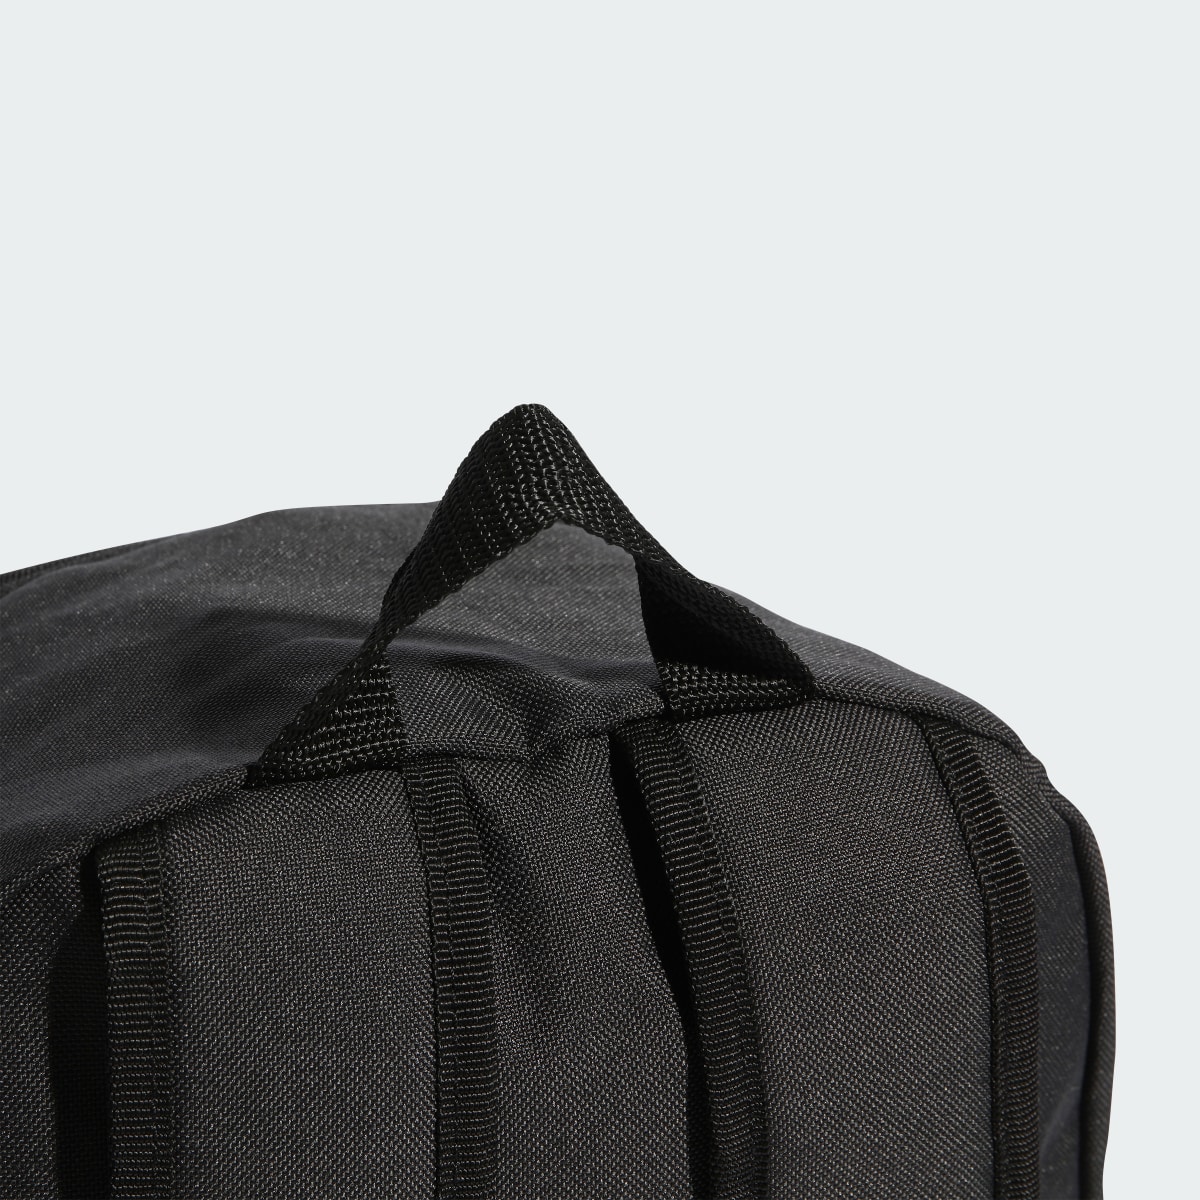 Adidas Classic Foundation Backpack. 6